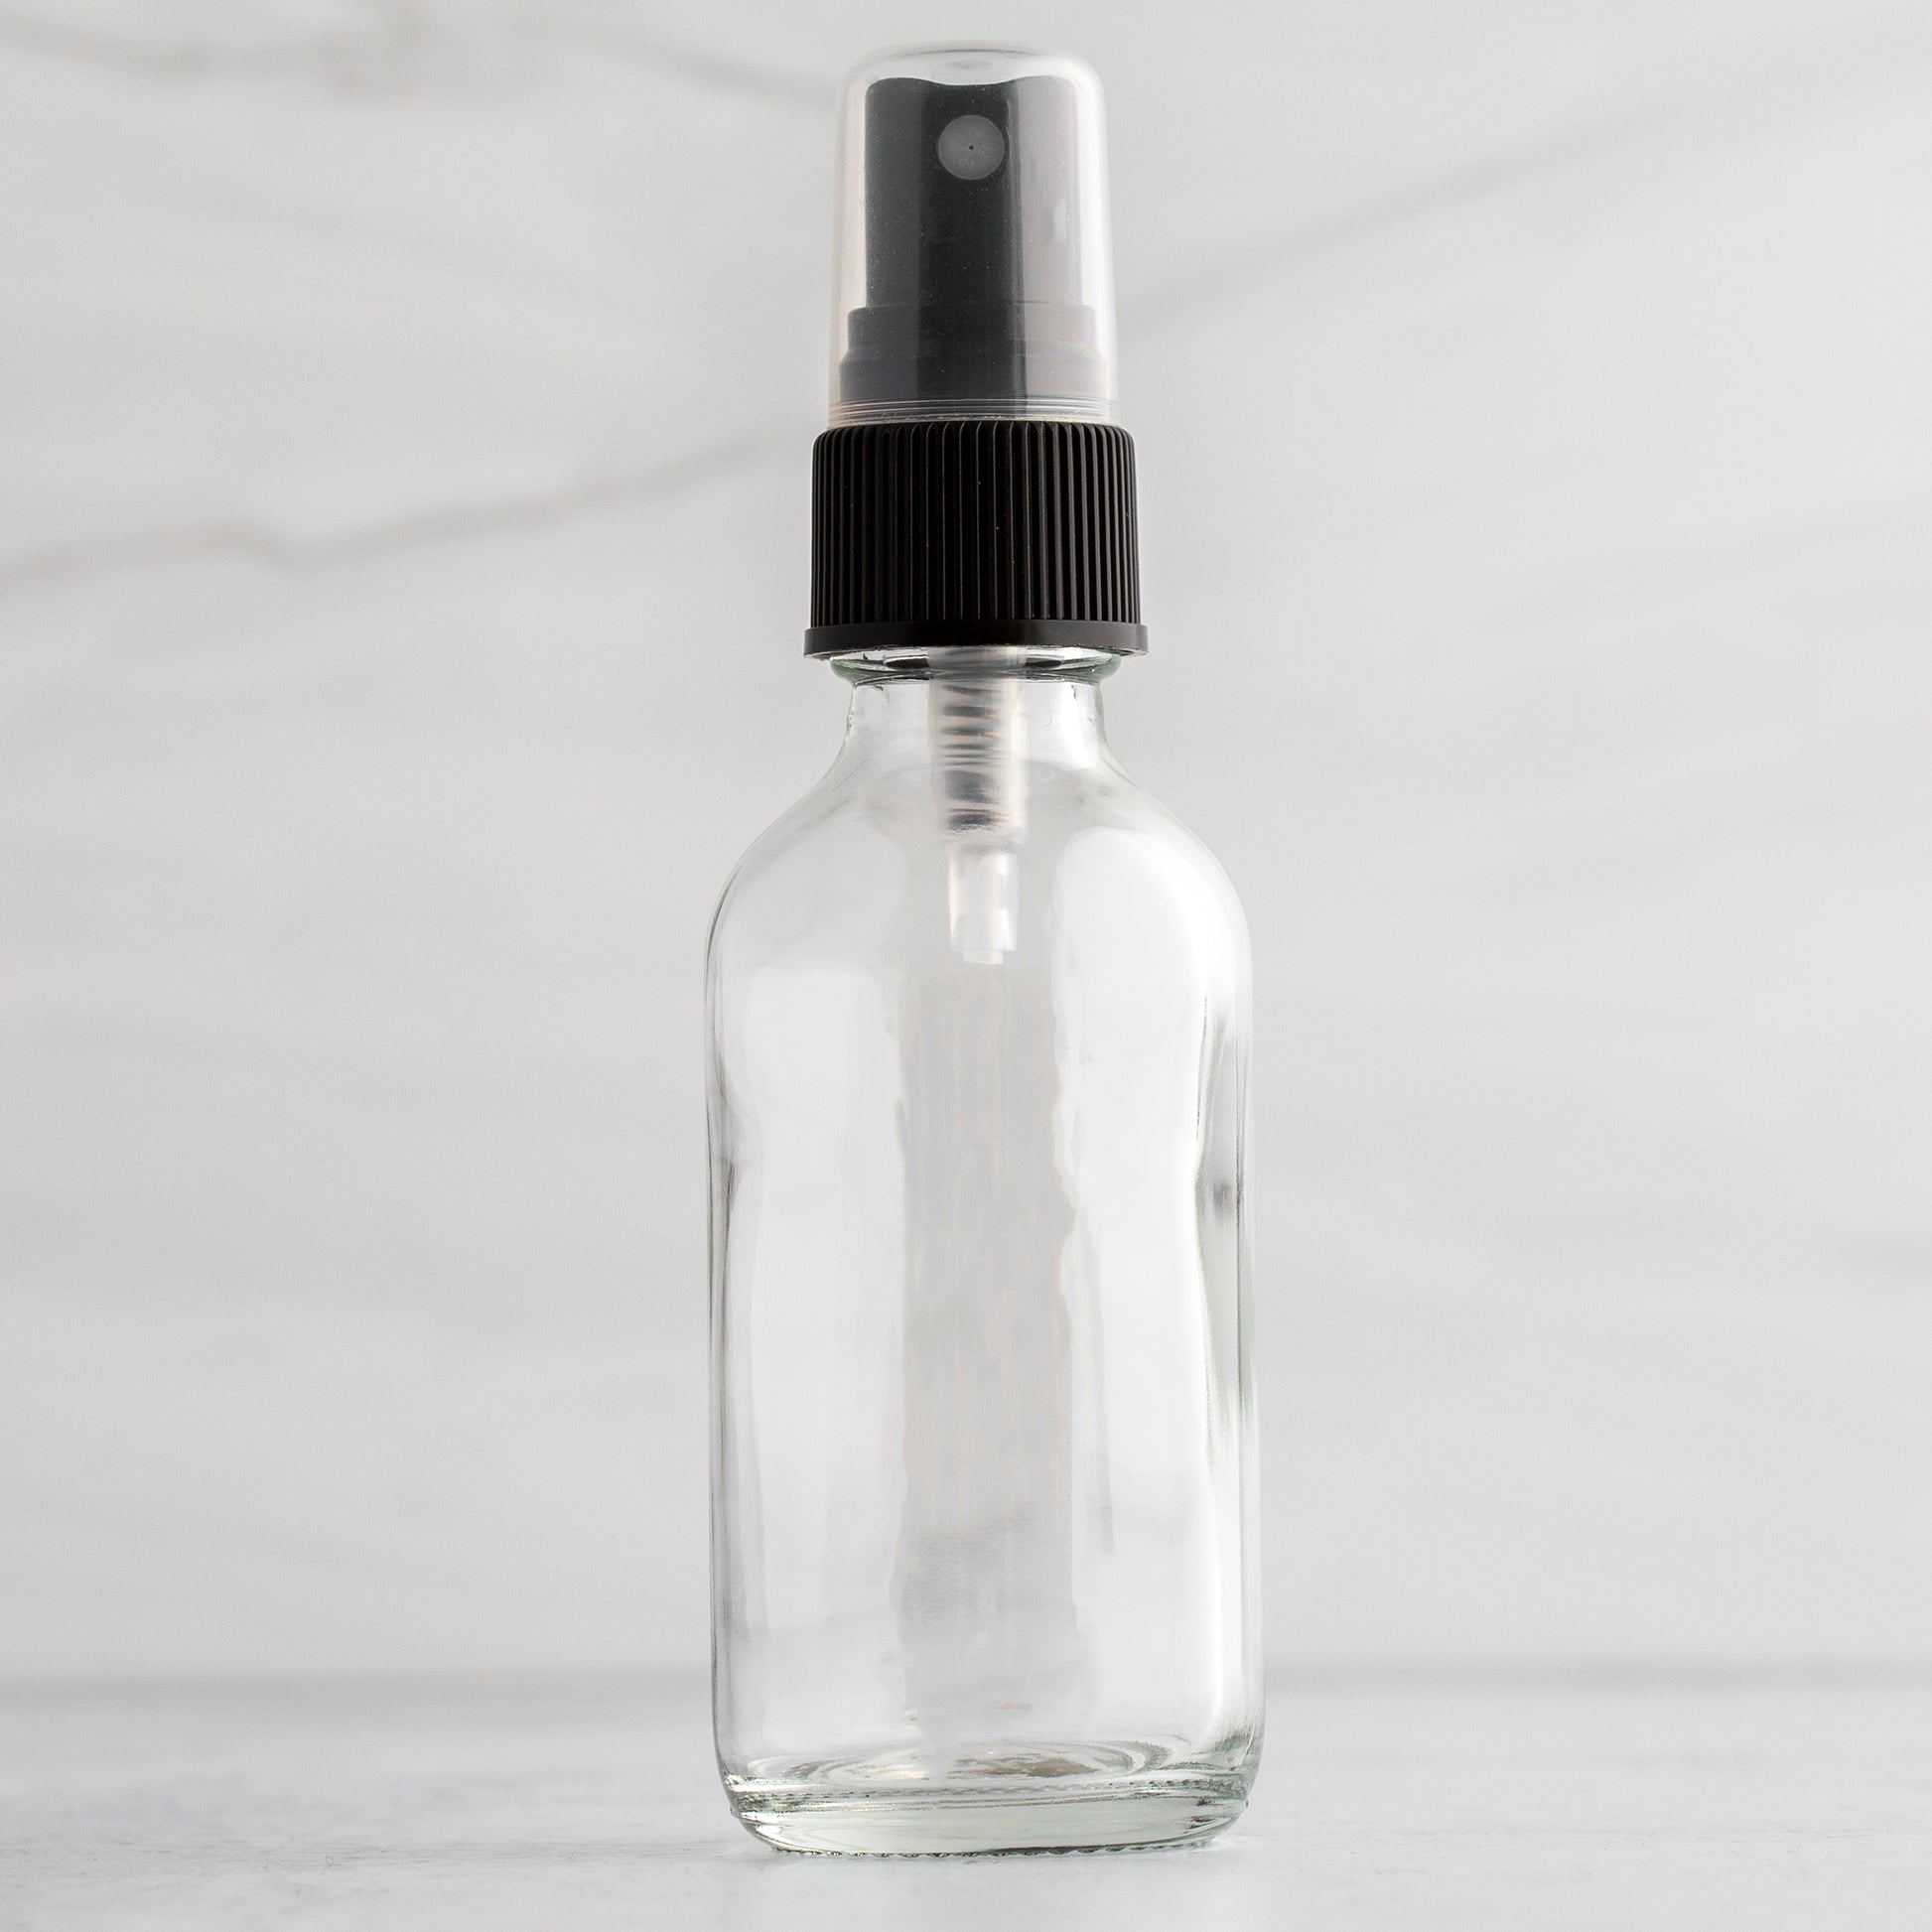 2 oz Clear Glass Bottle with Black Mister